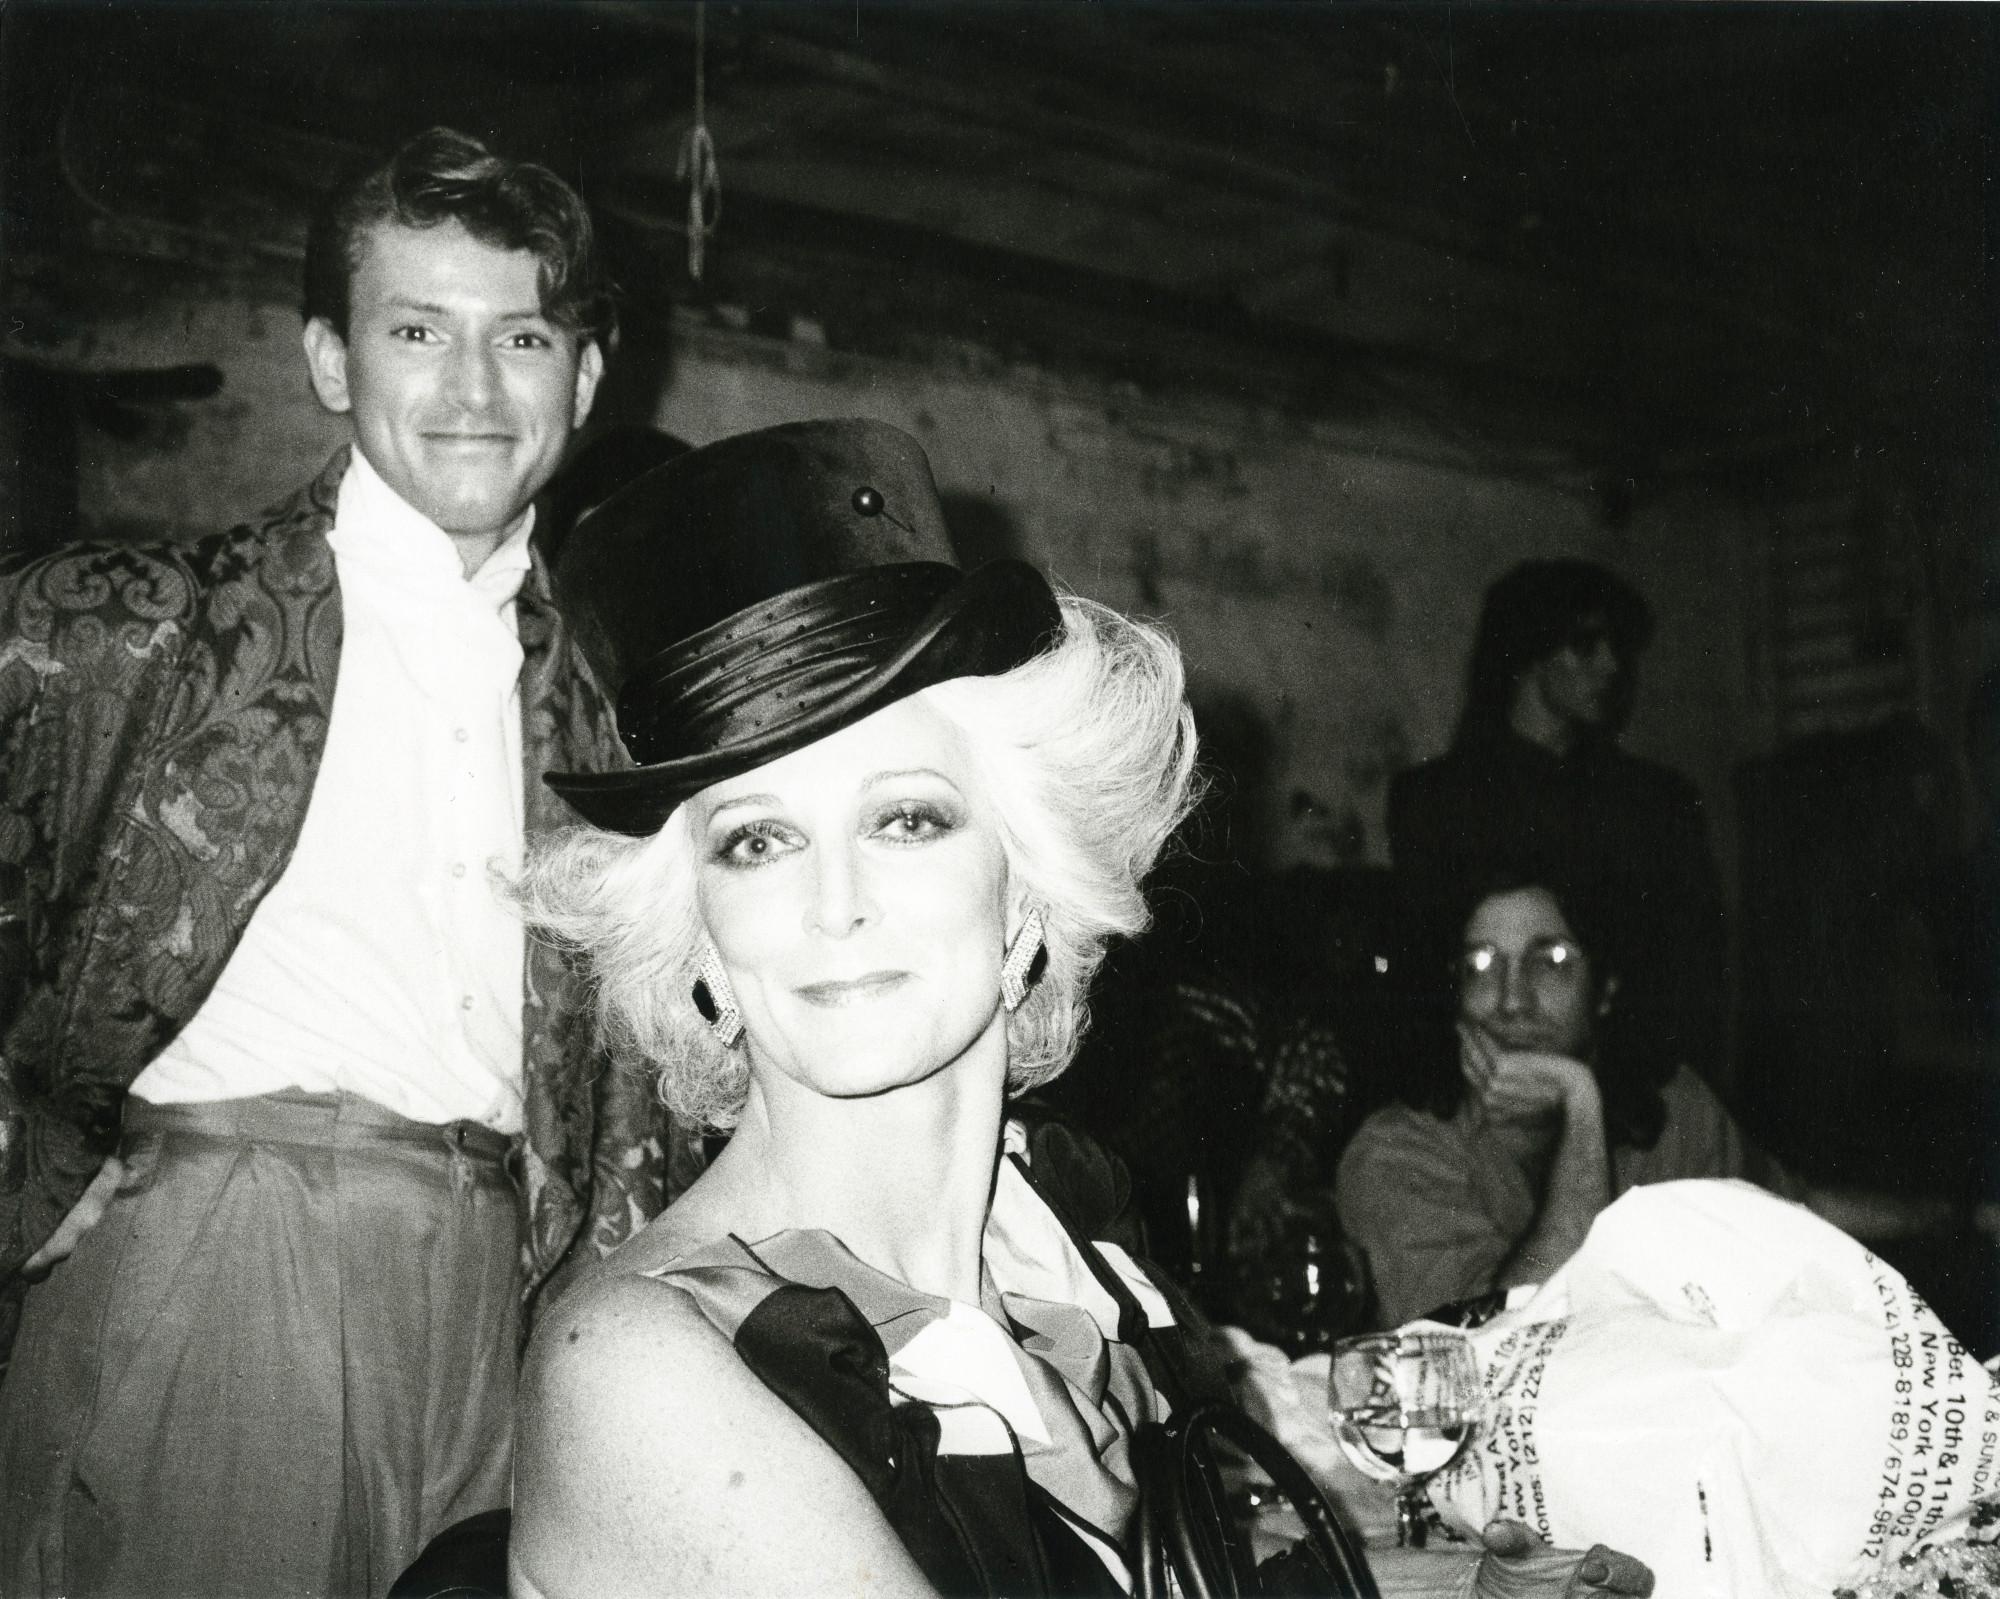 Andy Warhol Portrait Photograph - Carmen Dell'Orefice and Unidentified Man